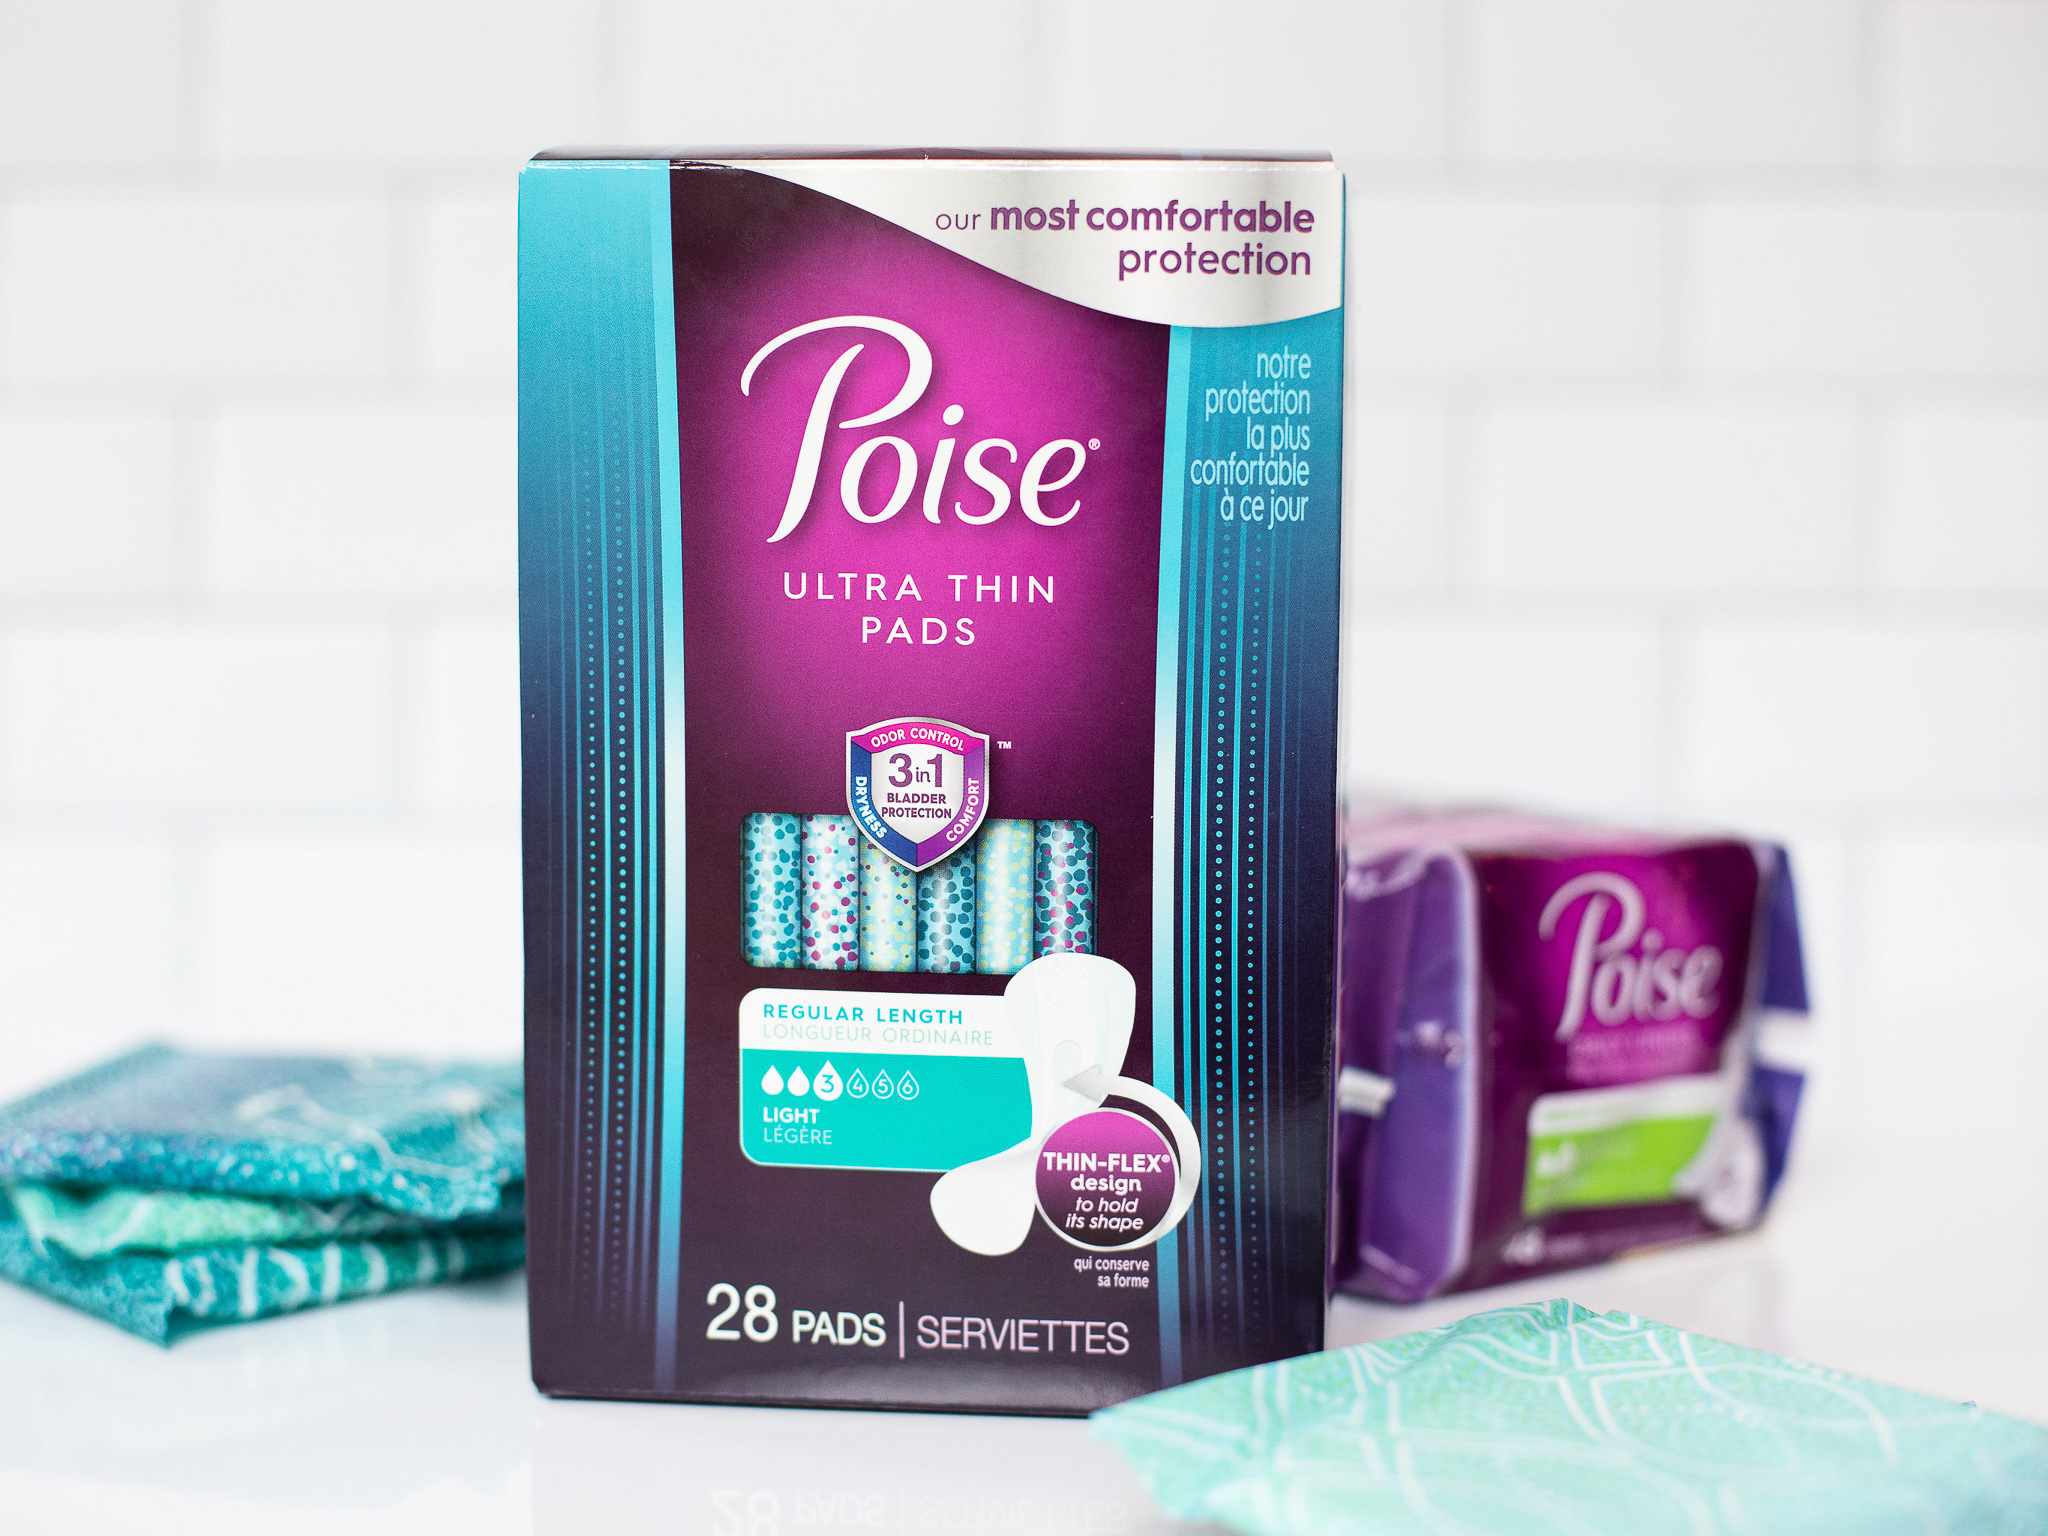 Don't Miss The Big Savings On Poise Ultra Thin Pads This Week At Publix on I Heart Publix